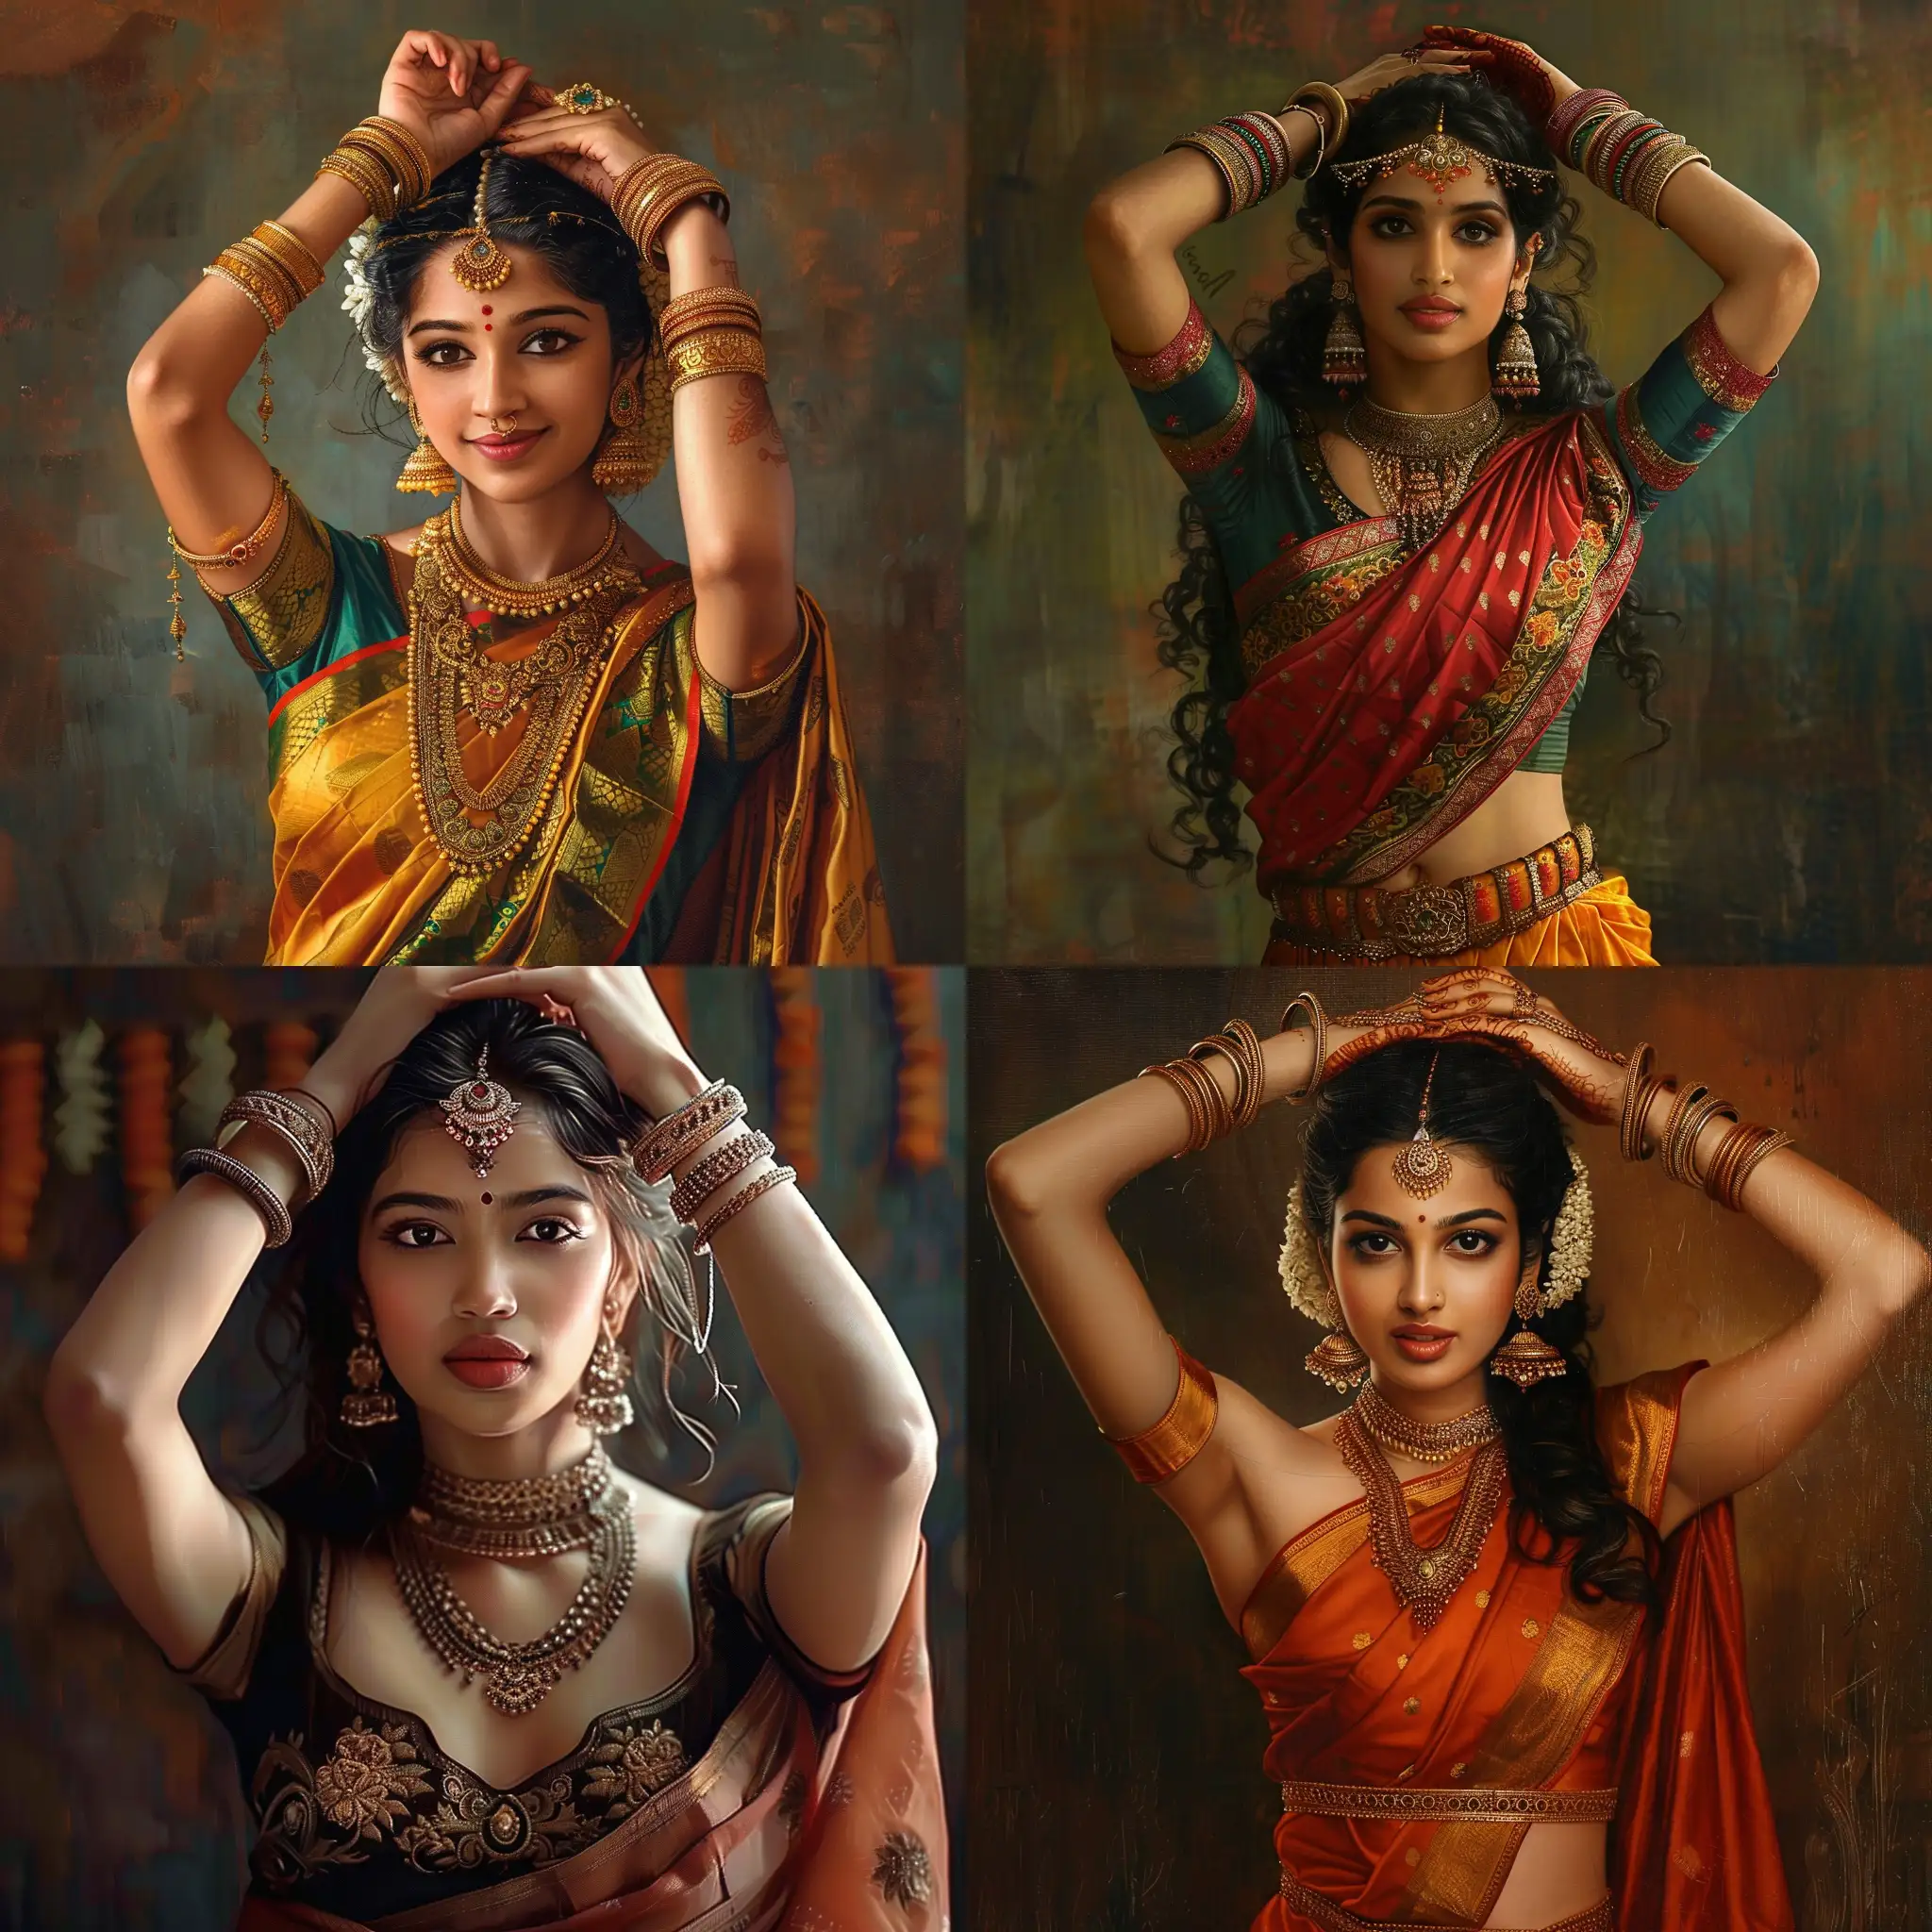 Realistic-Tamil-Women-in-Sleeveless-Attire-with-Hands-Raised